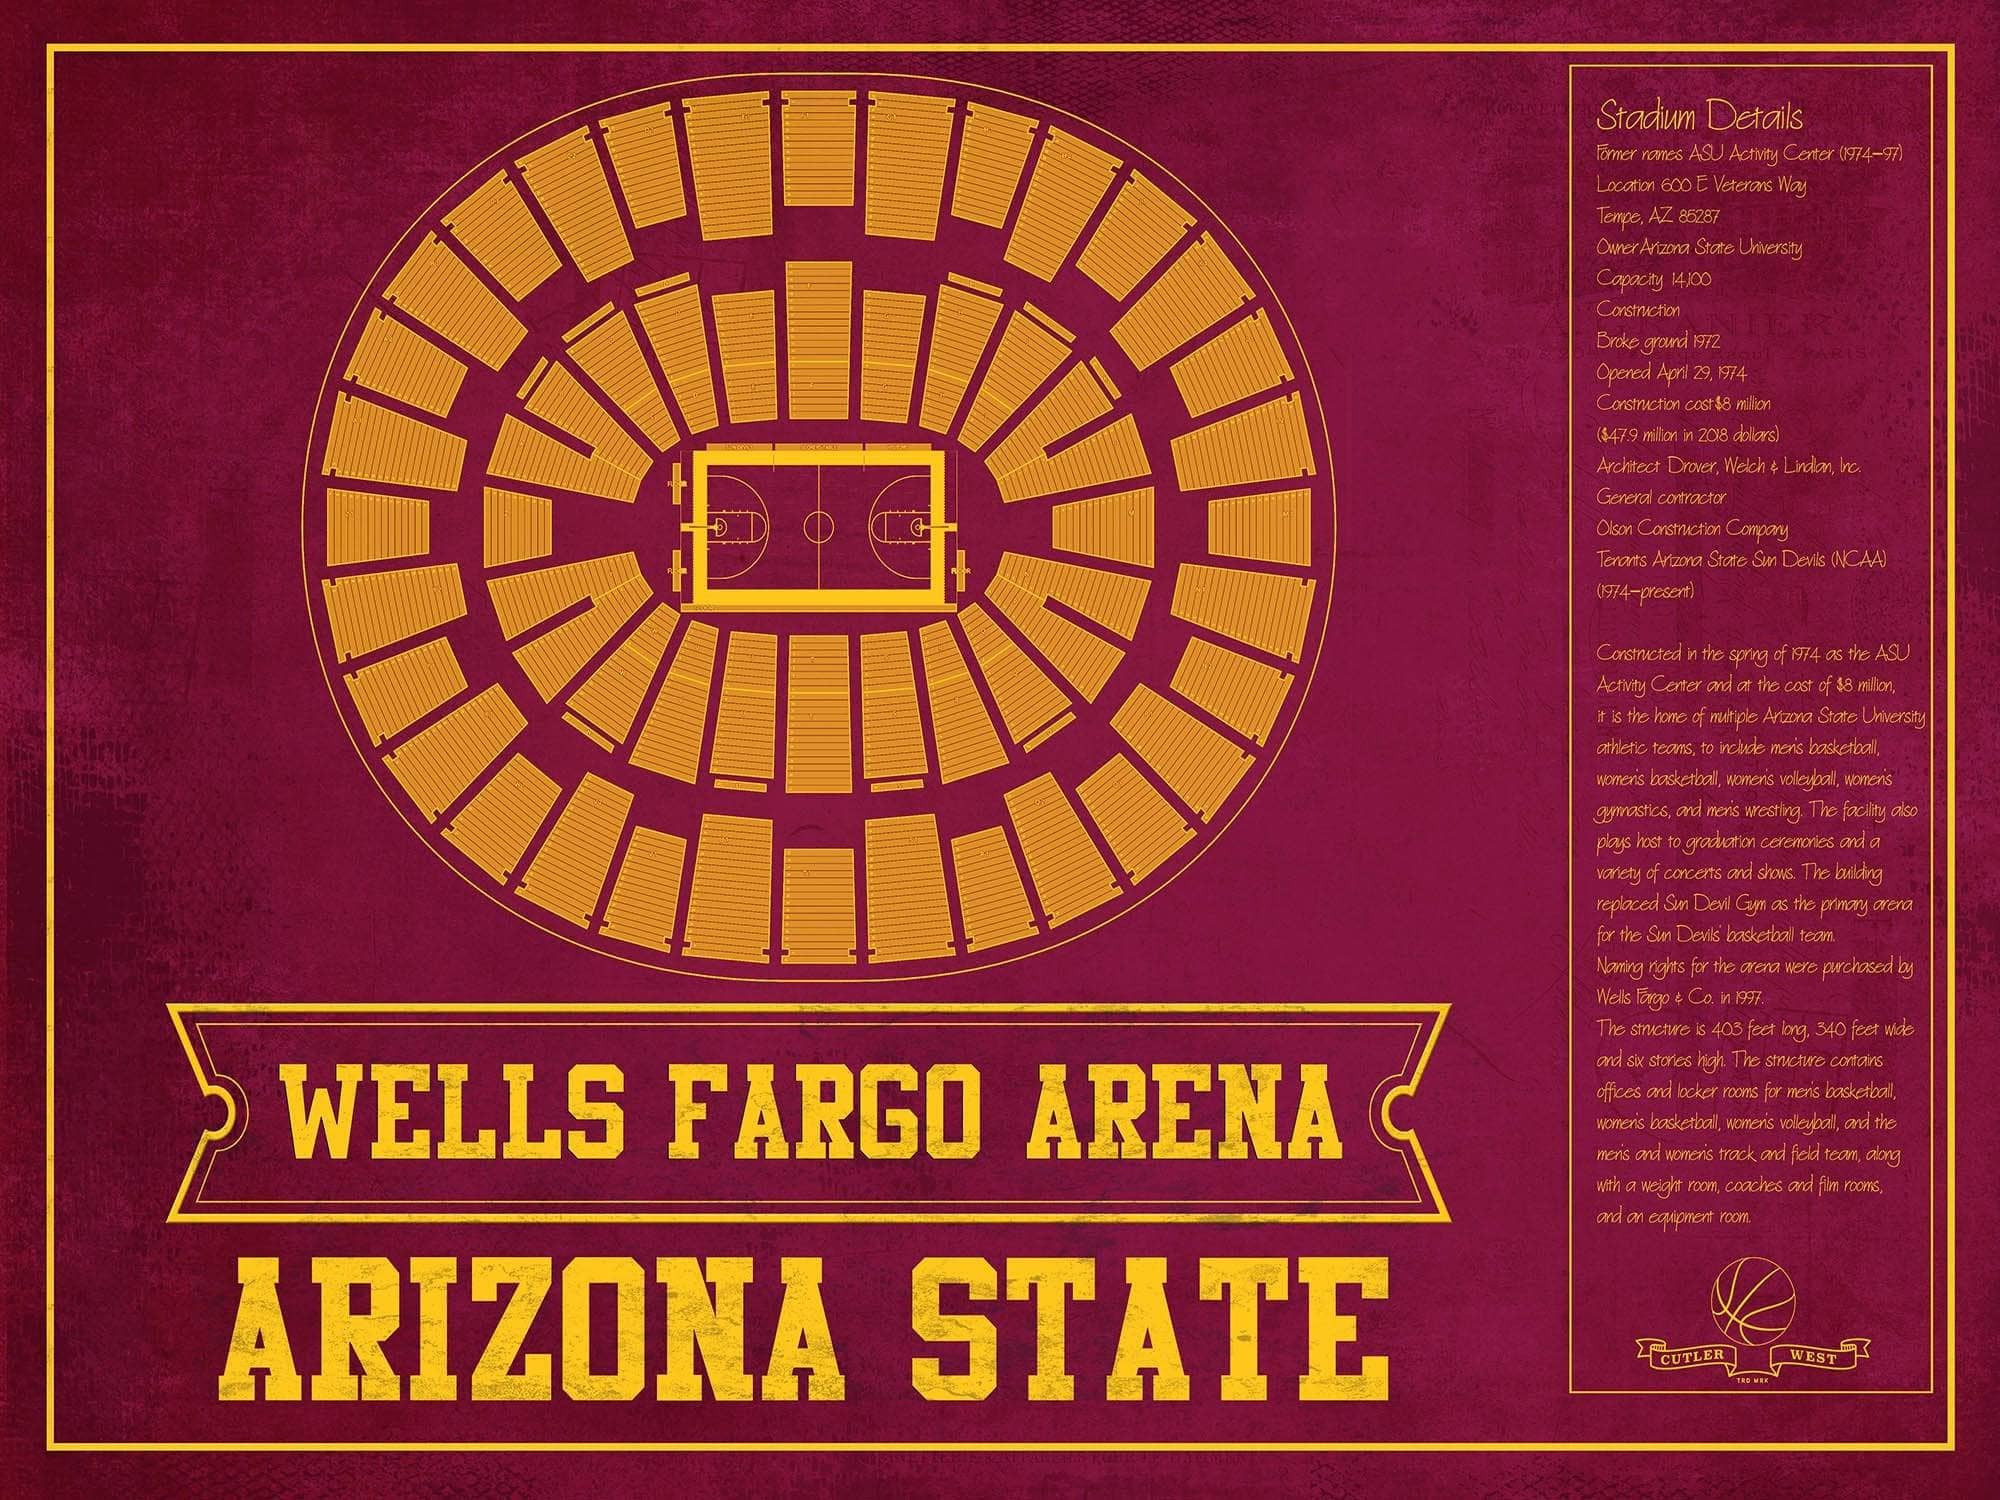 Cutler West Basketball Collection 14" x 11" / Unframed Arizona State University Wells Fargo Arena Teamcolor Seating Chart 933350228_82568